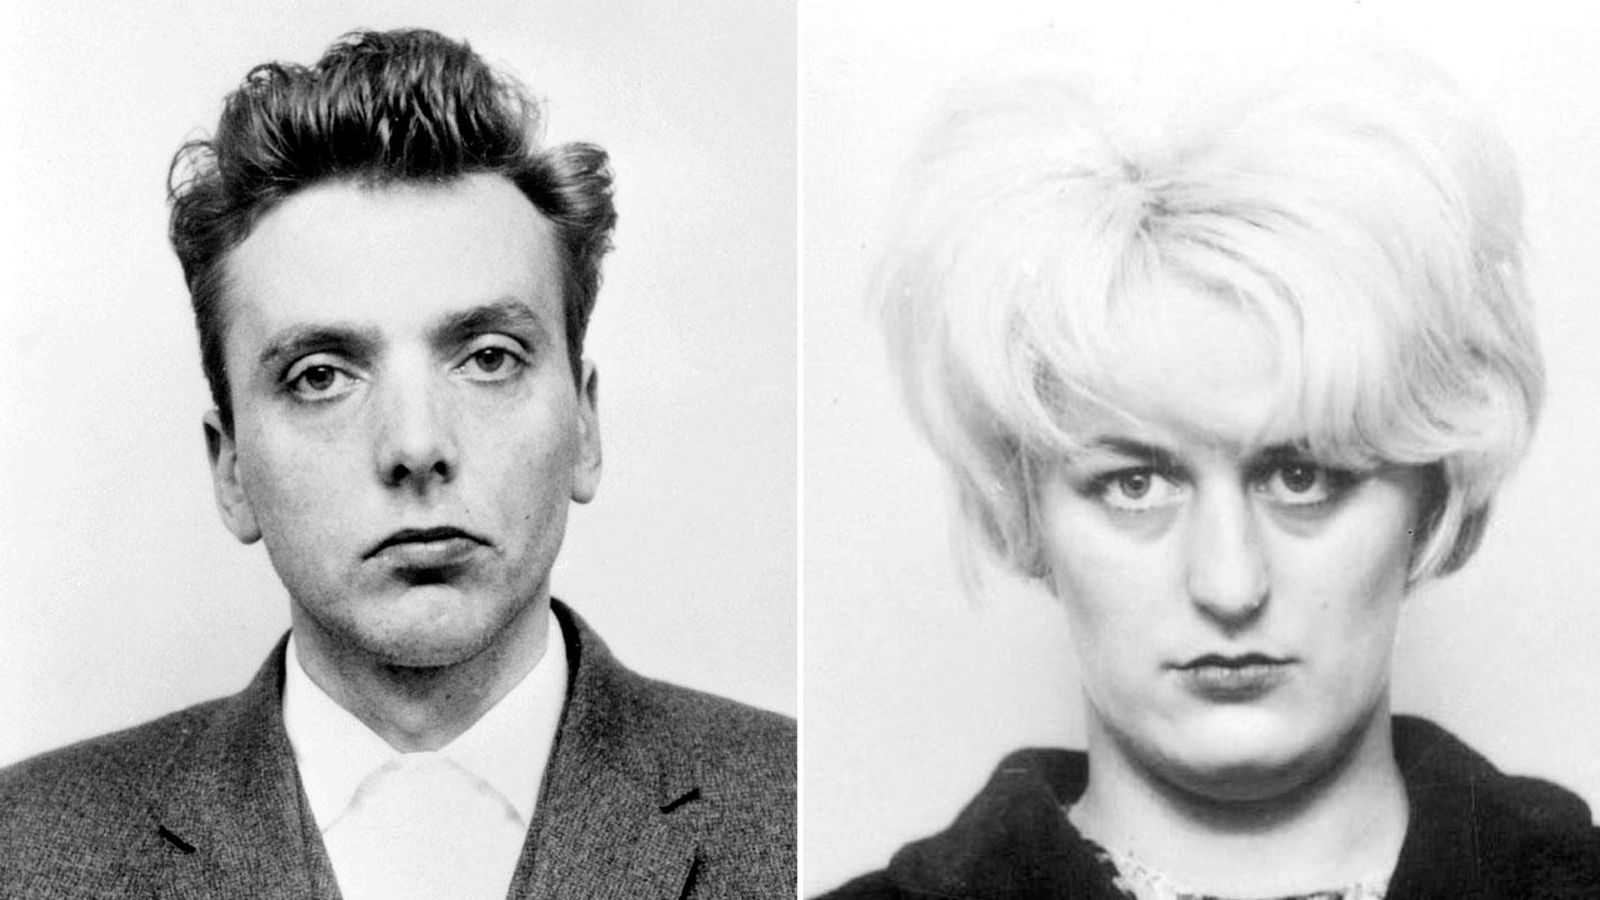 Suspected remains linked to Moors murders being investigated by police